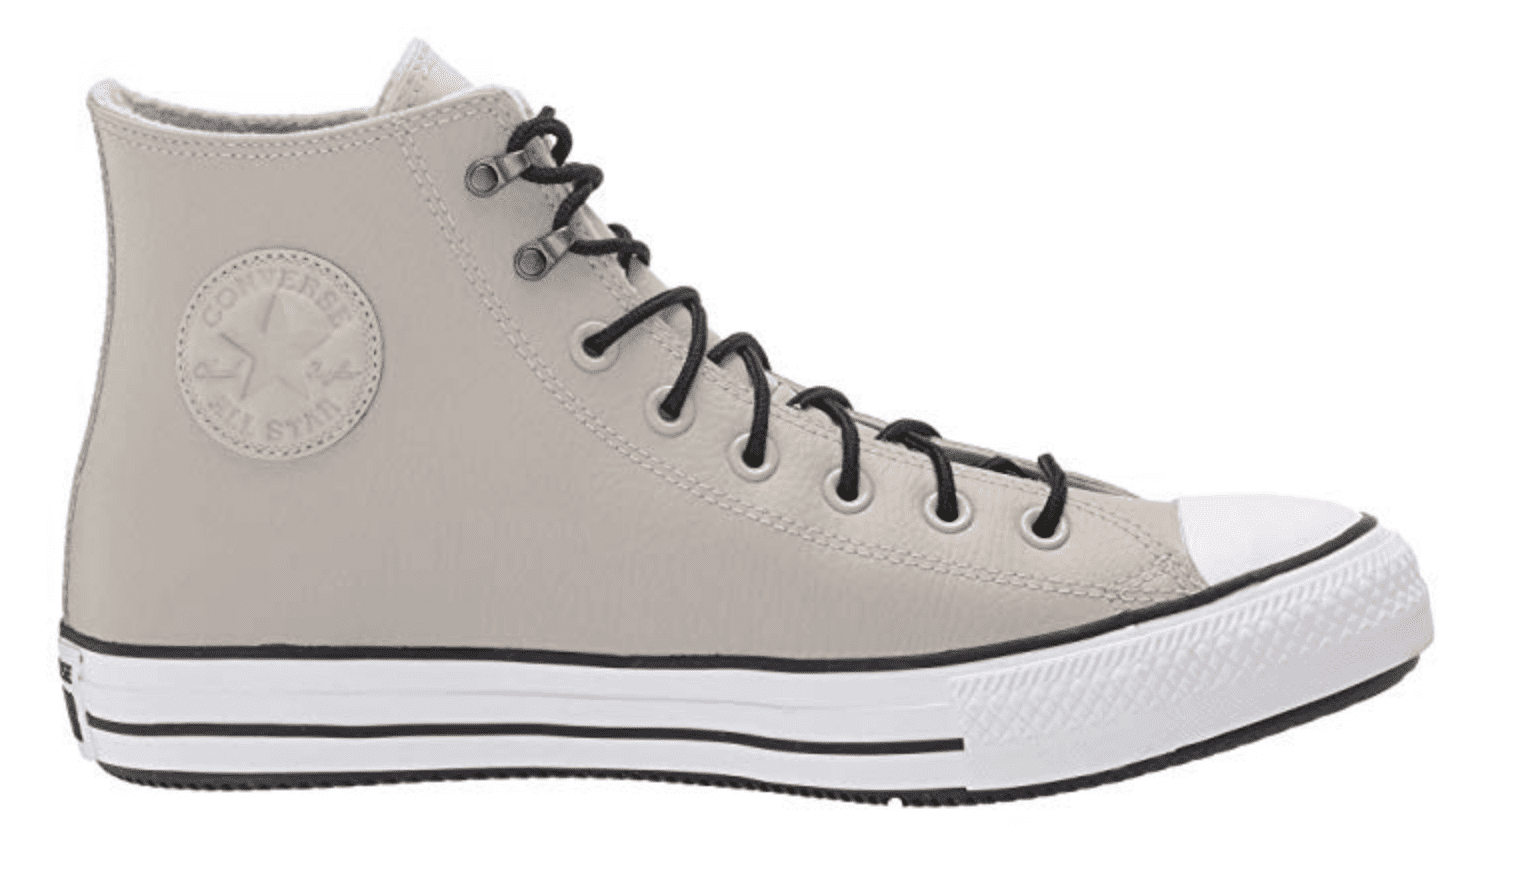 Converse-Chuck-Taylor-All-Star-Leather-Boot-Hi